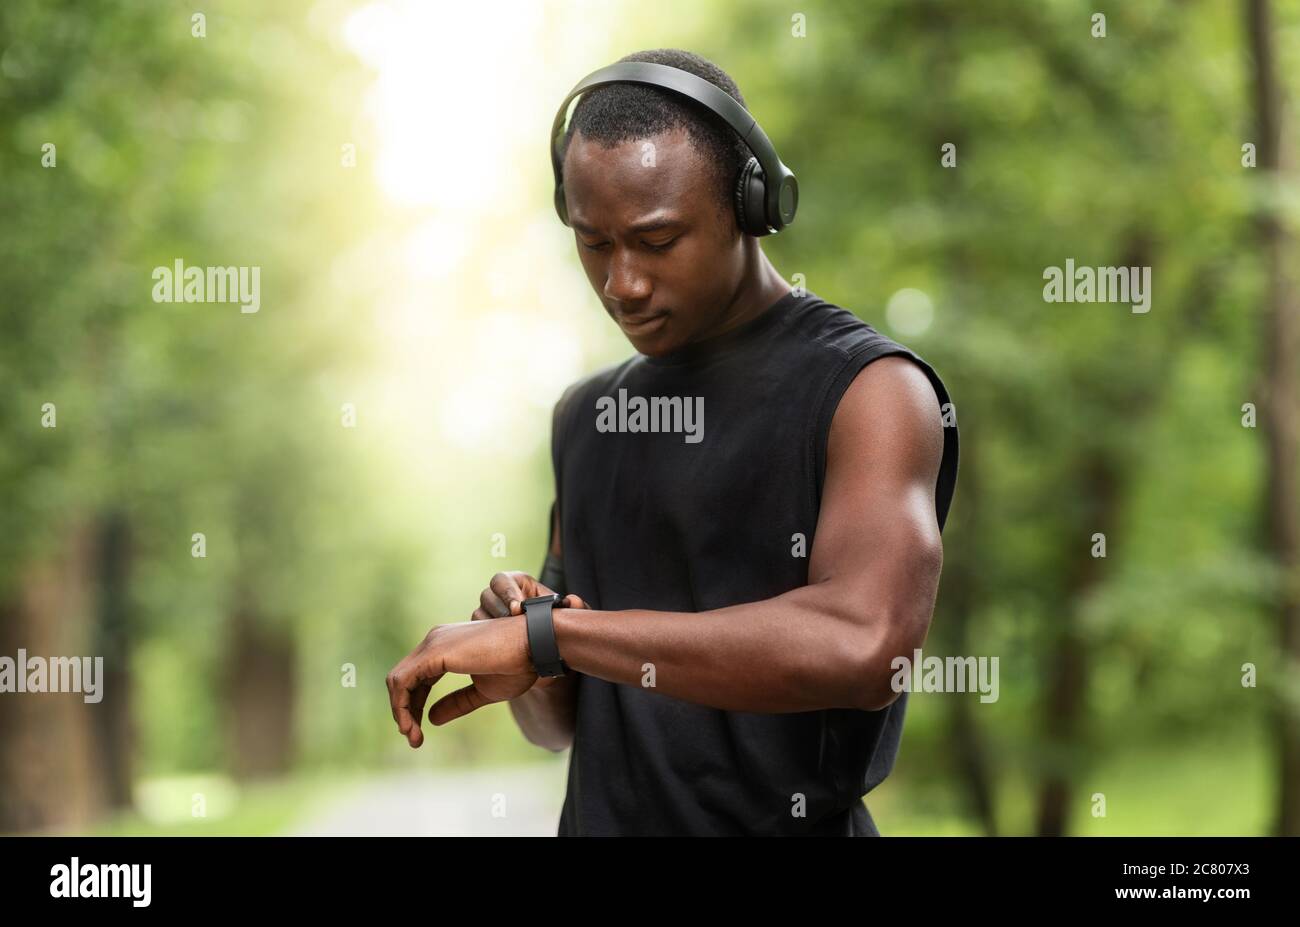 Black athletic guy working out with fitness bracelet Stock Photo